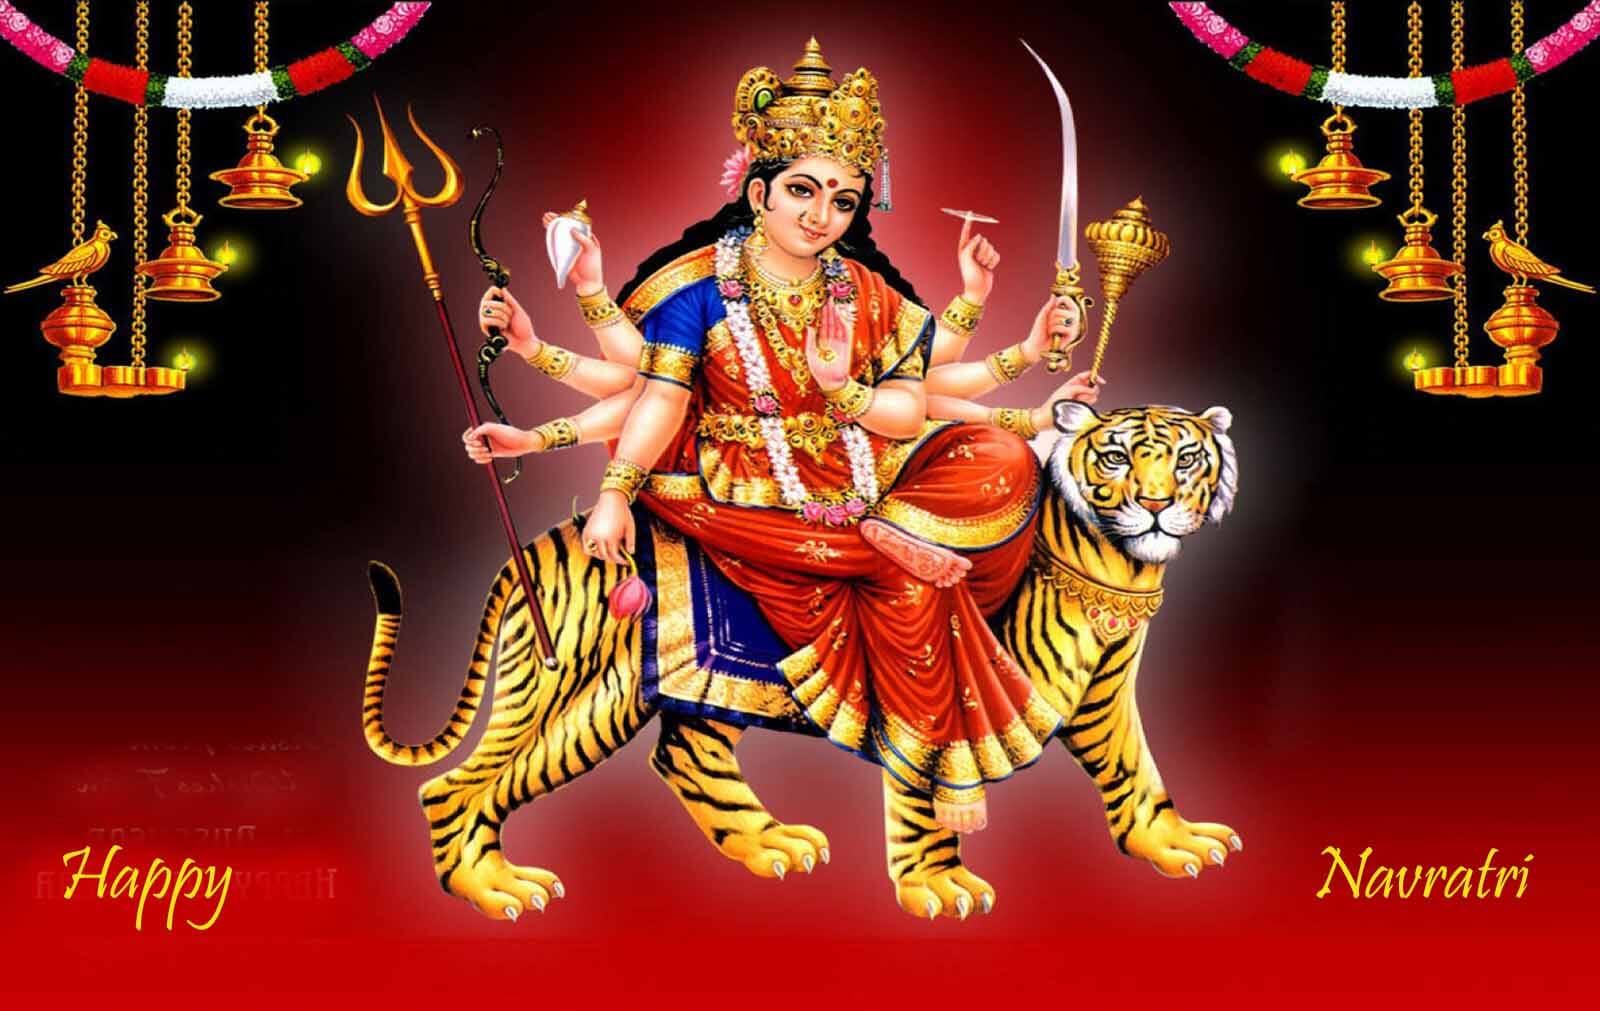 #{"id":42,"_id":"61f3f785e0f744570541c05a","name":"navratri","count":67,"data":"{\"_id\":{\"$oid\":\"61f3f785e0f744570541c05a\"},\"id\":\"17\",\"name\":\"navratri\",\"created_at\":\"2020-10-15-13:17:23\",\"updated_at\":\"2020-10-15-13:17:23\",\"updatedAt\":{\"$date\":\"2022-04-04T15:00:12.807Z\"},\"count\":67}","deleted_at":null,"created_at":"2020-10-15T01:17:23.000000Z","updated_at":"2020-10-15T01:17:23.000000Z","merge_with":null,"pivot":{"taggable_id":1344,"tag_id":42,"taggable_type":"App\\Models\\Status"}}, #{"id":1739,"_id":"624b035e3e6d397ee3459768","name":"best-navratri","count":15,"data":"{\"_id\":{\"$oid\":\"624b035e3e6d397ee3459768\"},\"name\":\"best-navratri\",\"count\":15,\"updatedAt\":{\"$date\":\"2022-04-04T15:00:12.807Z\"}}","deleted_at":null,"created_at":"2022-08-12T09:03:30.000000Z","updated_at":"2022-08-12T09:03:30.000000Z","merge_with":null,"pivot":{"taggable_id":1344,"tag_id":1739,"taggable_type":"App\\Models\\Status"}}, #{"id":1740,"_id":"624b035e3e6d397ee3459769","name":"navratri-special","count":15,"data":"{\"_id\":{\"$oid\":\"624b035e3e6d397ee3459769\"},\"name\":\"navratri-special\",\"count\":15,\"updatedAt\":{\"$date\":\"2022-04-04T15:00:12.807Z\"}}","deleted_at":null,"created_at":"2022-08-12T09:03:30.000000Z","updated_at":"2022-08-12T09:03:30.000000Z","merge_with":null,"pivot":{"taggable_id":1344,"tag_id":1740,"taggable_type":"App\\Models\\Status"}}, #{"id":1741,"_id":"624b035e3e6d397ee345976a","name":"happy-navratri","count":15,"data":"{\"_id\":{\"$oid\":\"624b035e3e6d397ee345976a\"},\"name\":\"happy-navratri\",\"count\":15,\"updatedAt\":{\"$date\":\"2022-04-04T15:00:12.807Z\"}}","deleted_at":null,"created_at":"2022-08-12T09:03:30.000000Z","updated_at":"2022-08-12T09:03:30.000000Z","merge_with":null,"pivot":{"taggable_id":1344,"tag_id":1741,"taggable_type":"App\\Models\\Status"}}, #{"id":1738,"_id":"624b035e3e6d397ee3459767","name":"navratri-whatsapp","count":15,"data":"{\"_id\":{\"$oid\":\"624b035e3e6d397ee3459767\"},\"name\":\"navratri-whatsapp\",\"count\":15,\"updatedAt\":{\"$date\":\"2022-04-04T15:00:12.807Z\"}}","deleted_at":null,"created_at":"2022-08-12T09:03:30.000000Z","updated_at":"2022-08-12T09:03:30.000000Z","merge_with":null,"pivot":{"taggable_id":1344,"tag_id":1738,"taggable_type":"App\\Models\\Status"}}